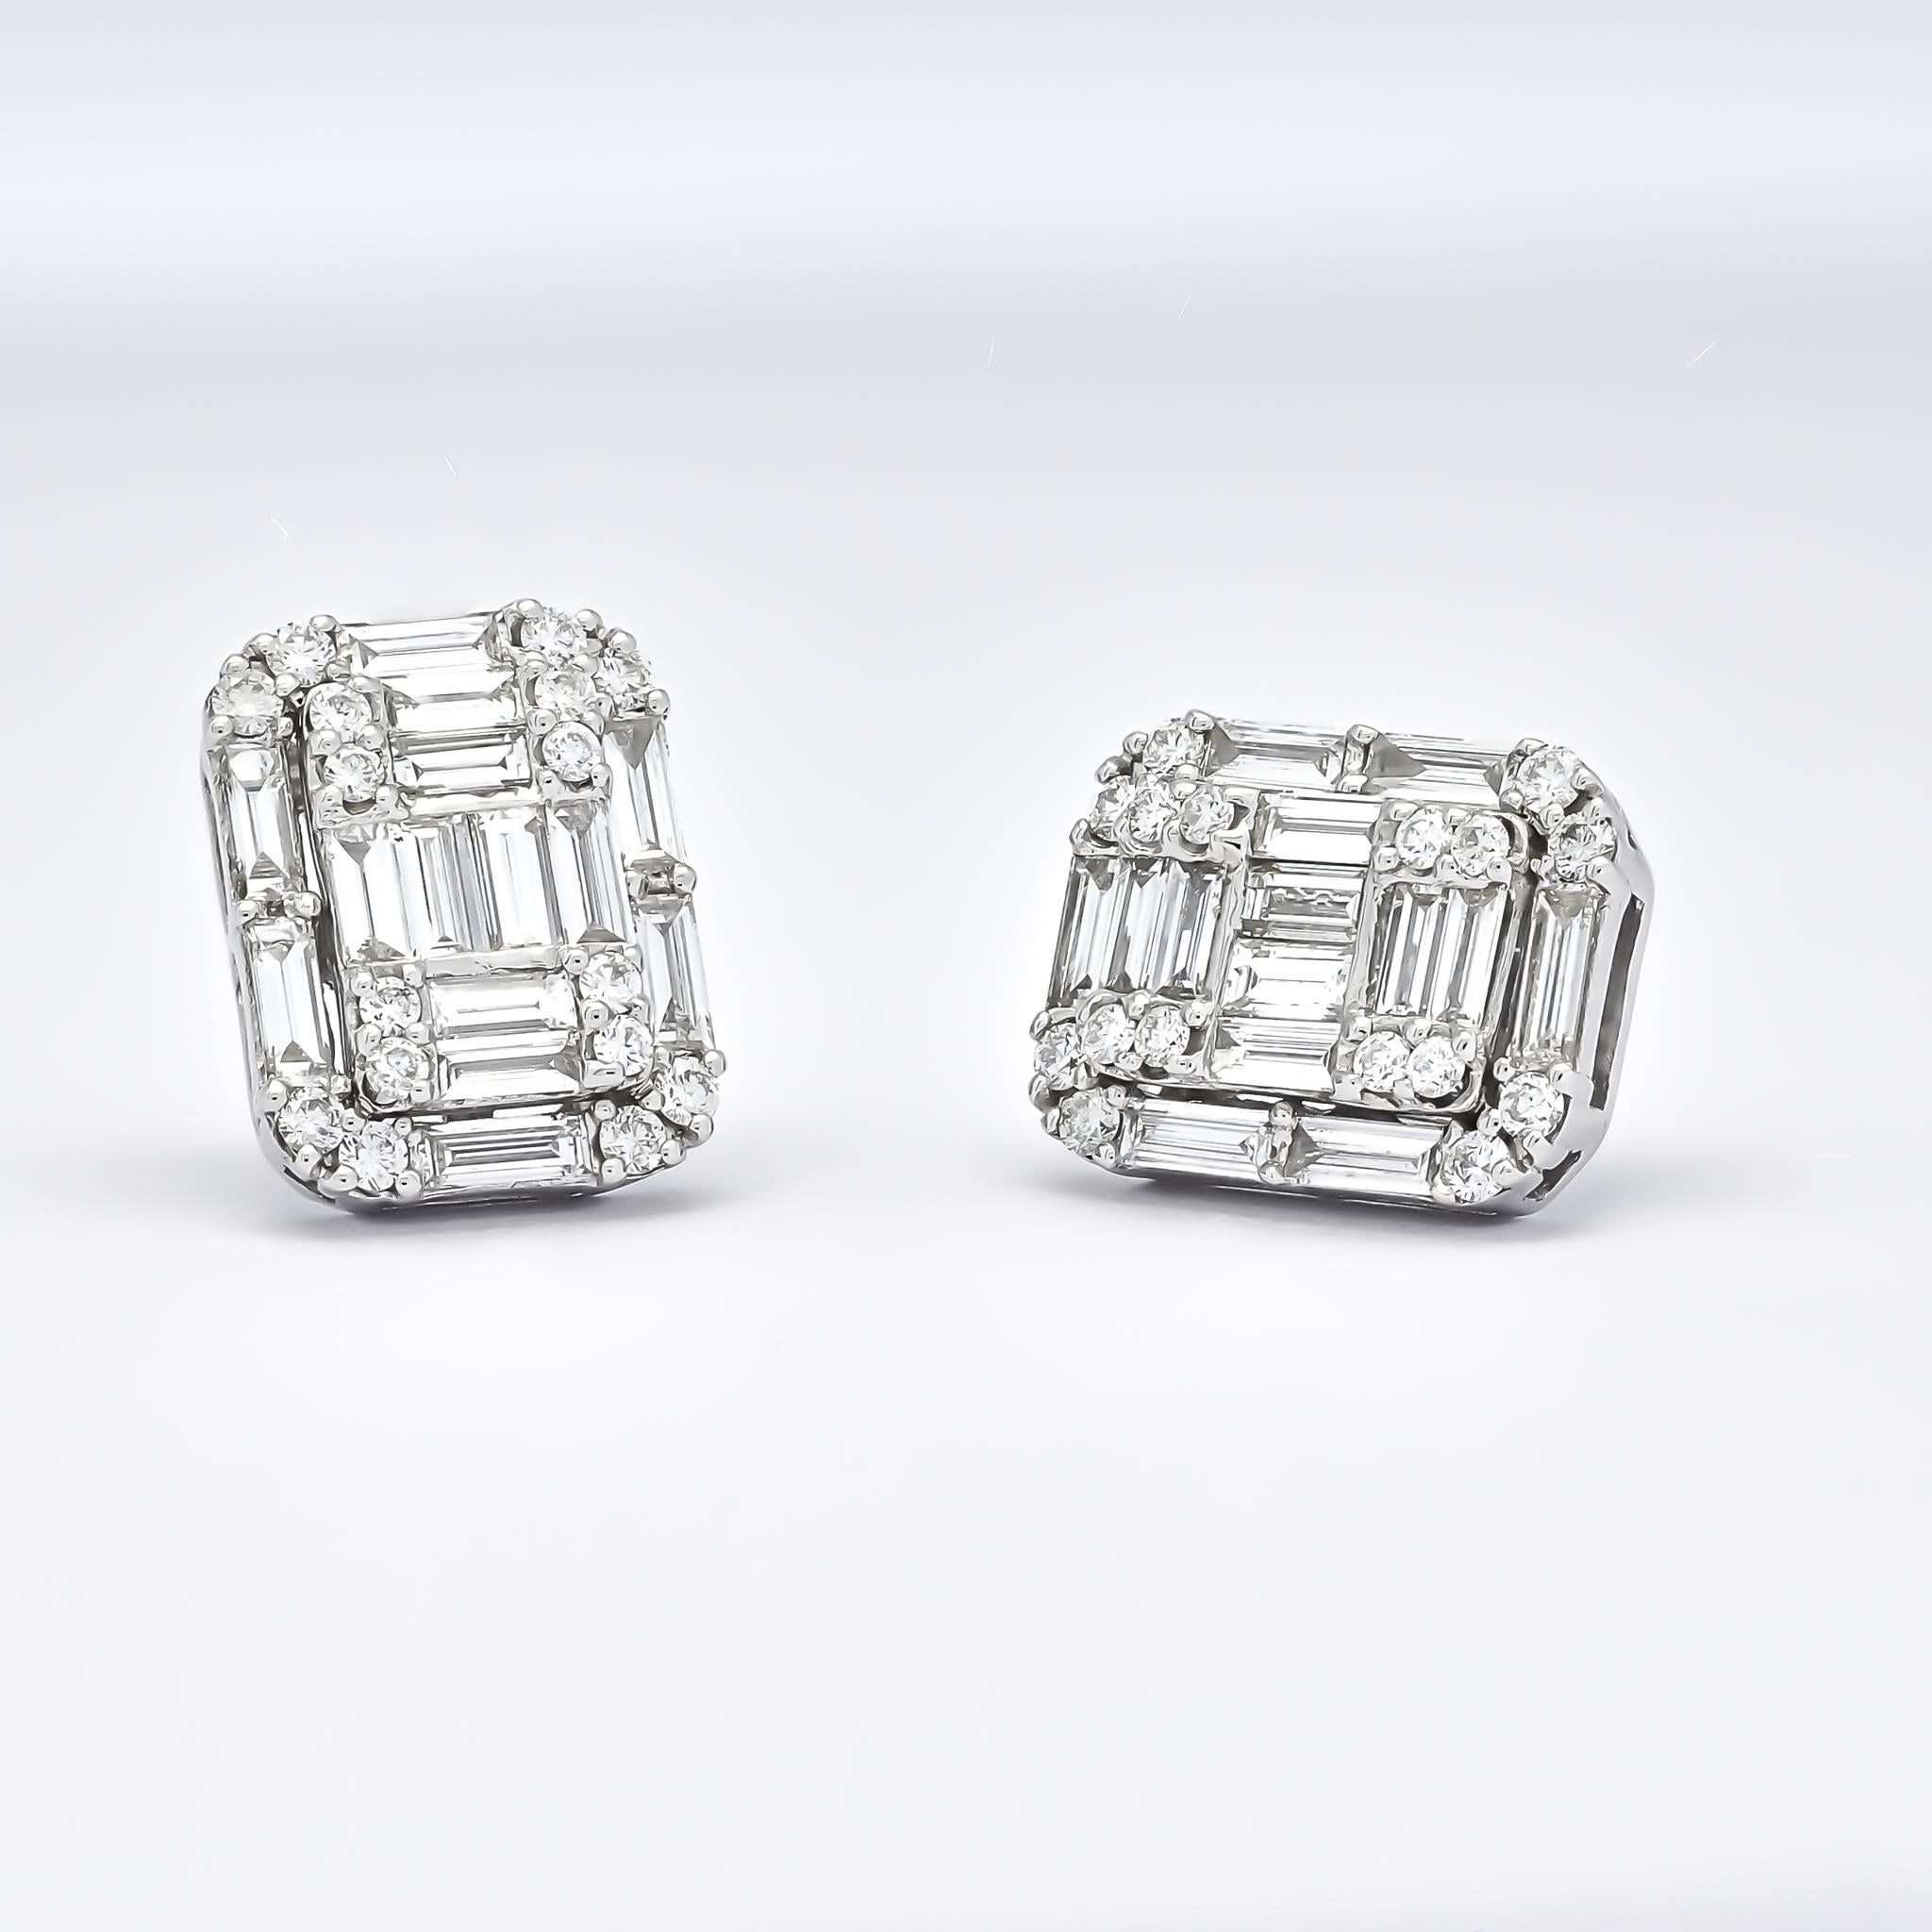 The delicate cluster of round and baguette diamonds draws the eye in, while the halo of baguette diamonds adds a radiant frame, enhancing the overall brilliance of the earrings.

Prepare to indulge in pure luxury with these breathtaking diamond